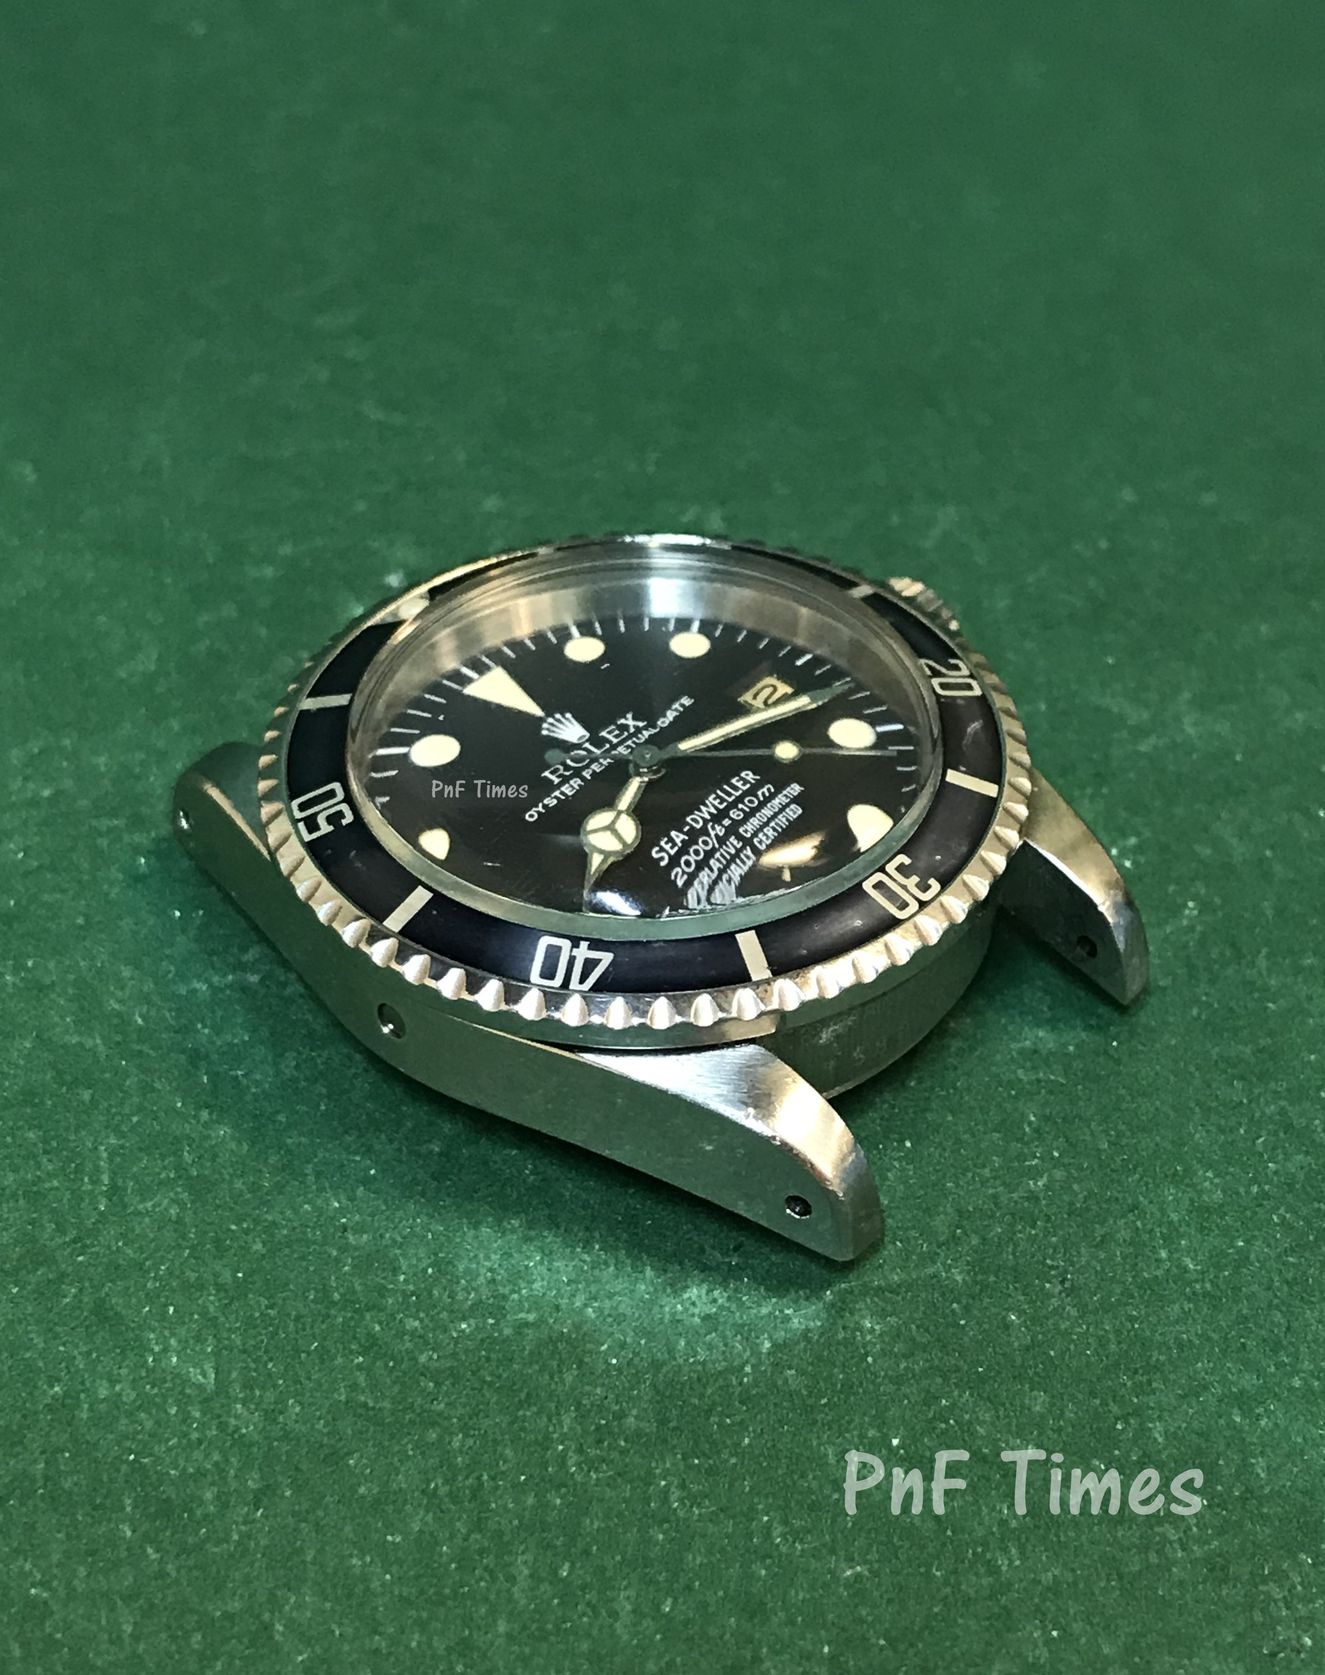 Rolex 16660 Oyster Perpetual Date Sea-Dweller Black Dial With 93160  Bracelet (SOLD) – PnF Times